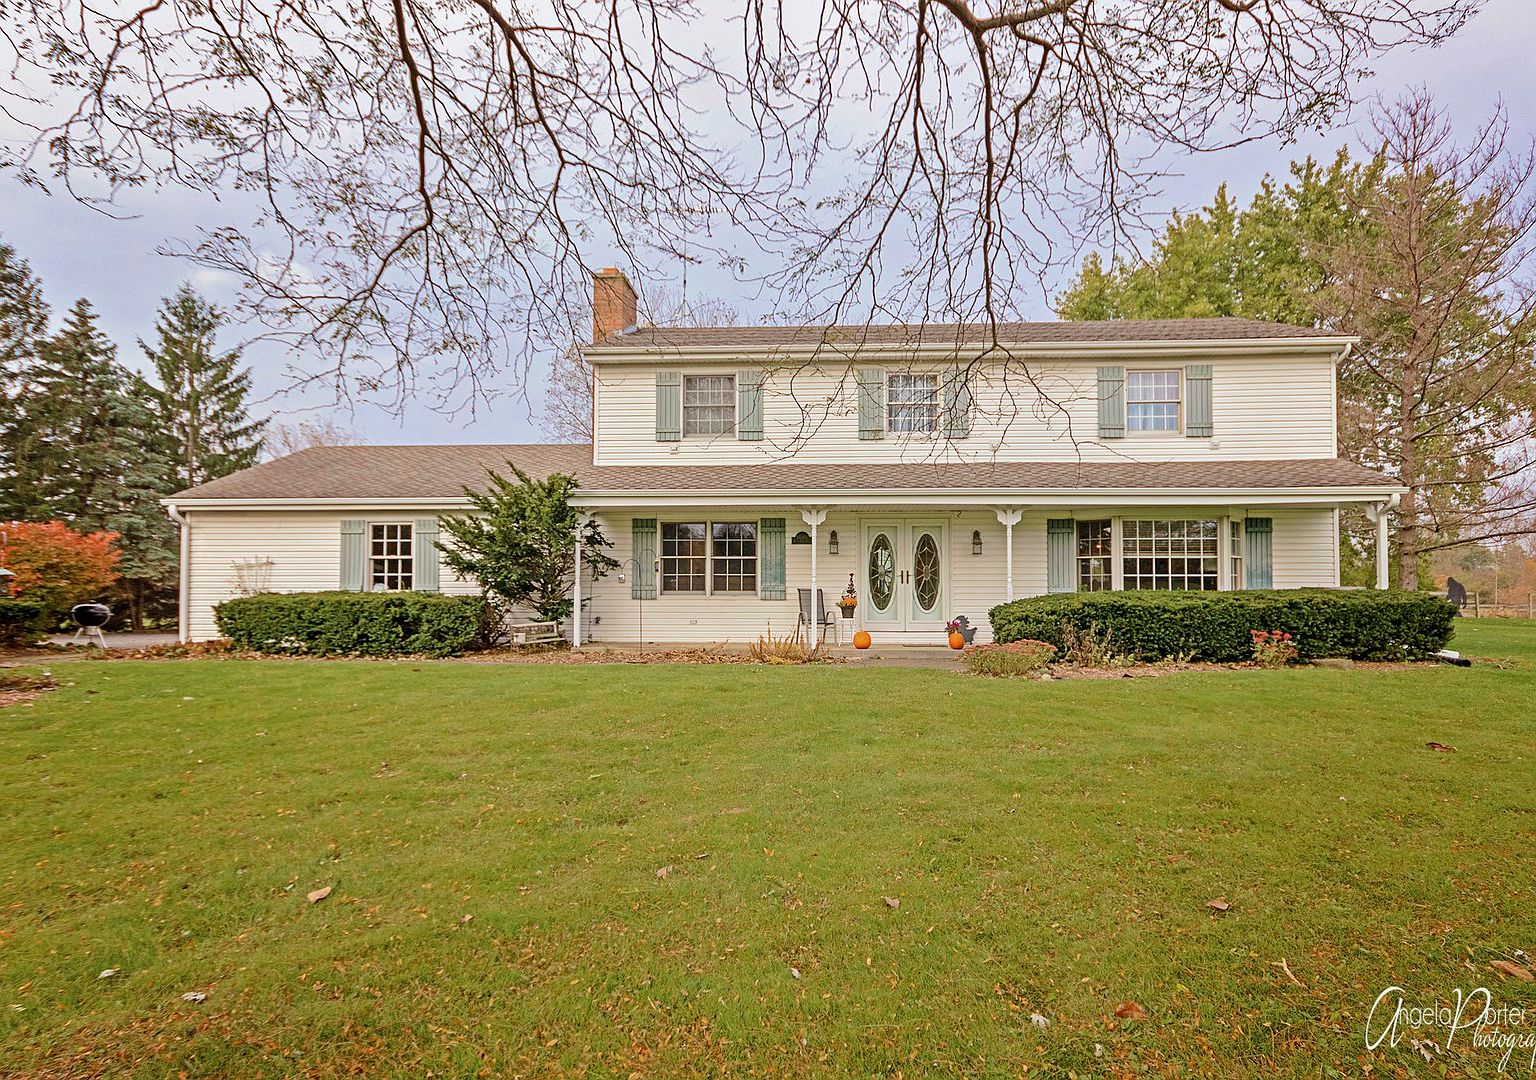 40116 N Deep Lake Rd, Antioch, IL 60002 | Zillow